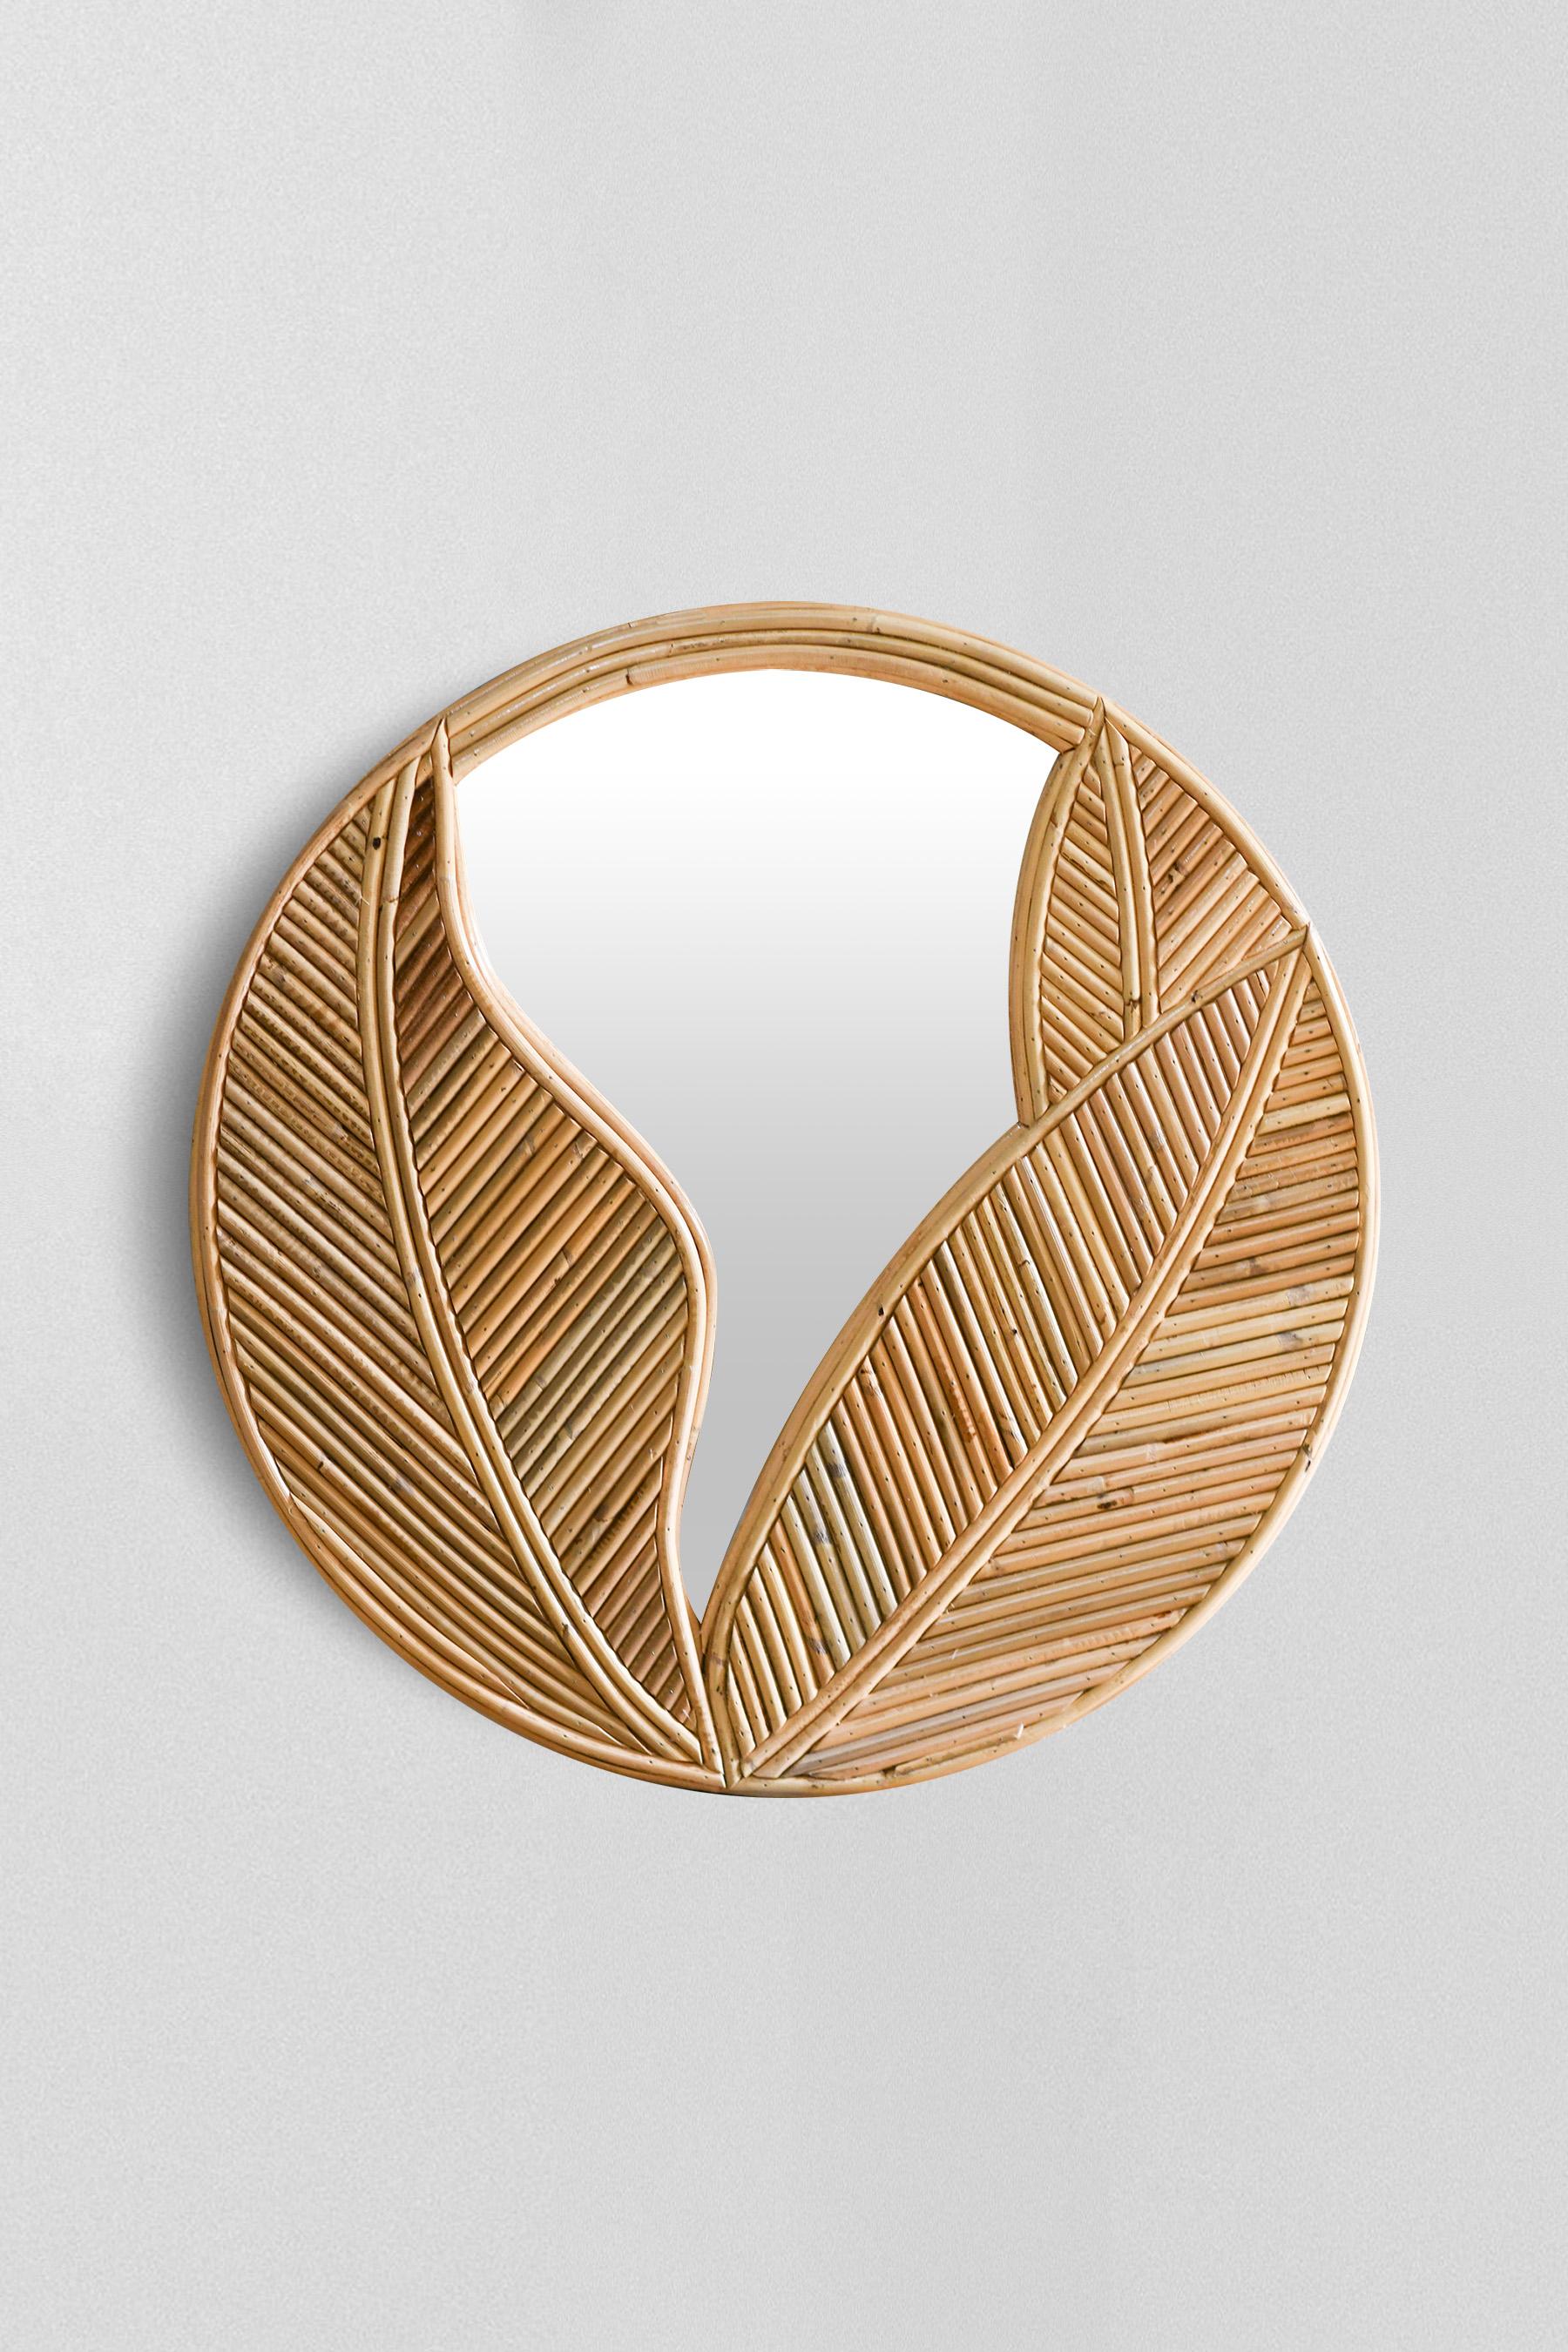 Circular rush mirror with leaves.
Dimensions: 56 L x 56 H x 2 D cm
Production: Vivai del Sud, Italy, 1970